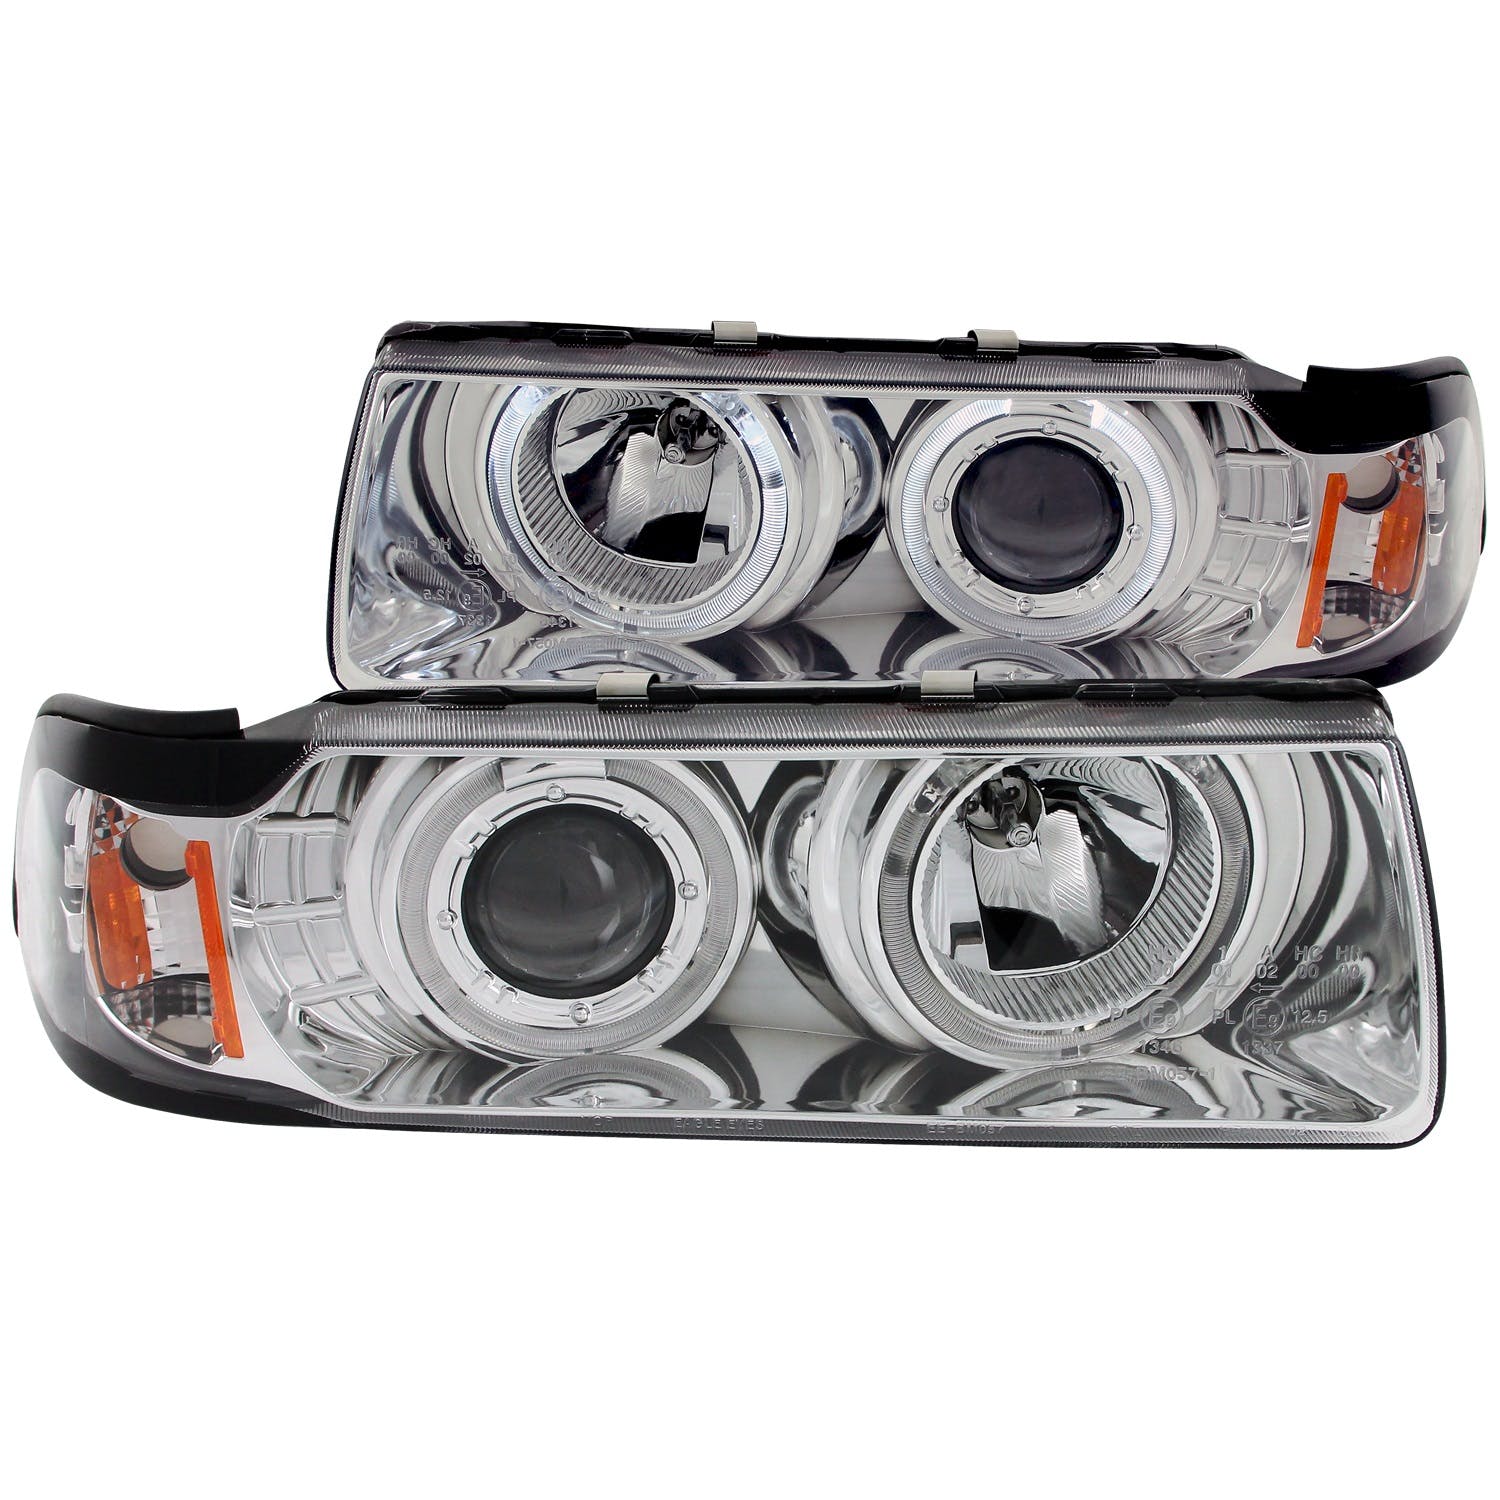 AnzoUSA 121326 Projector Headlights with Halo Chrome G2 1 pc